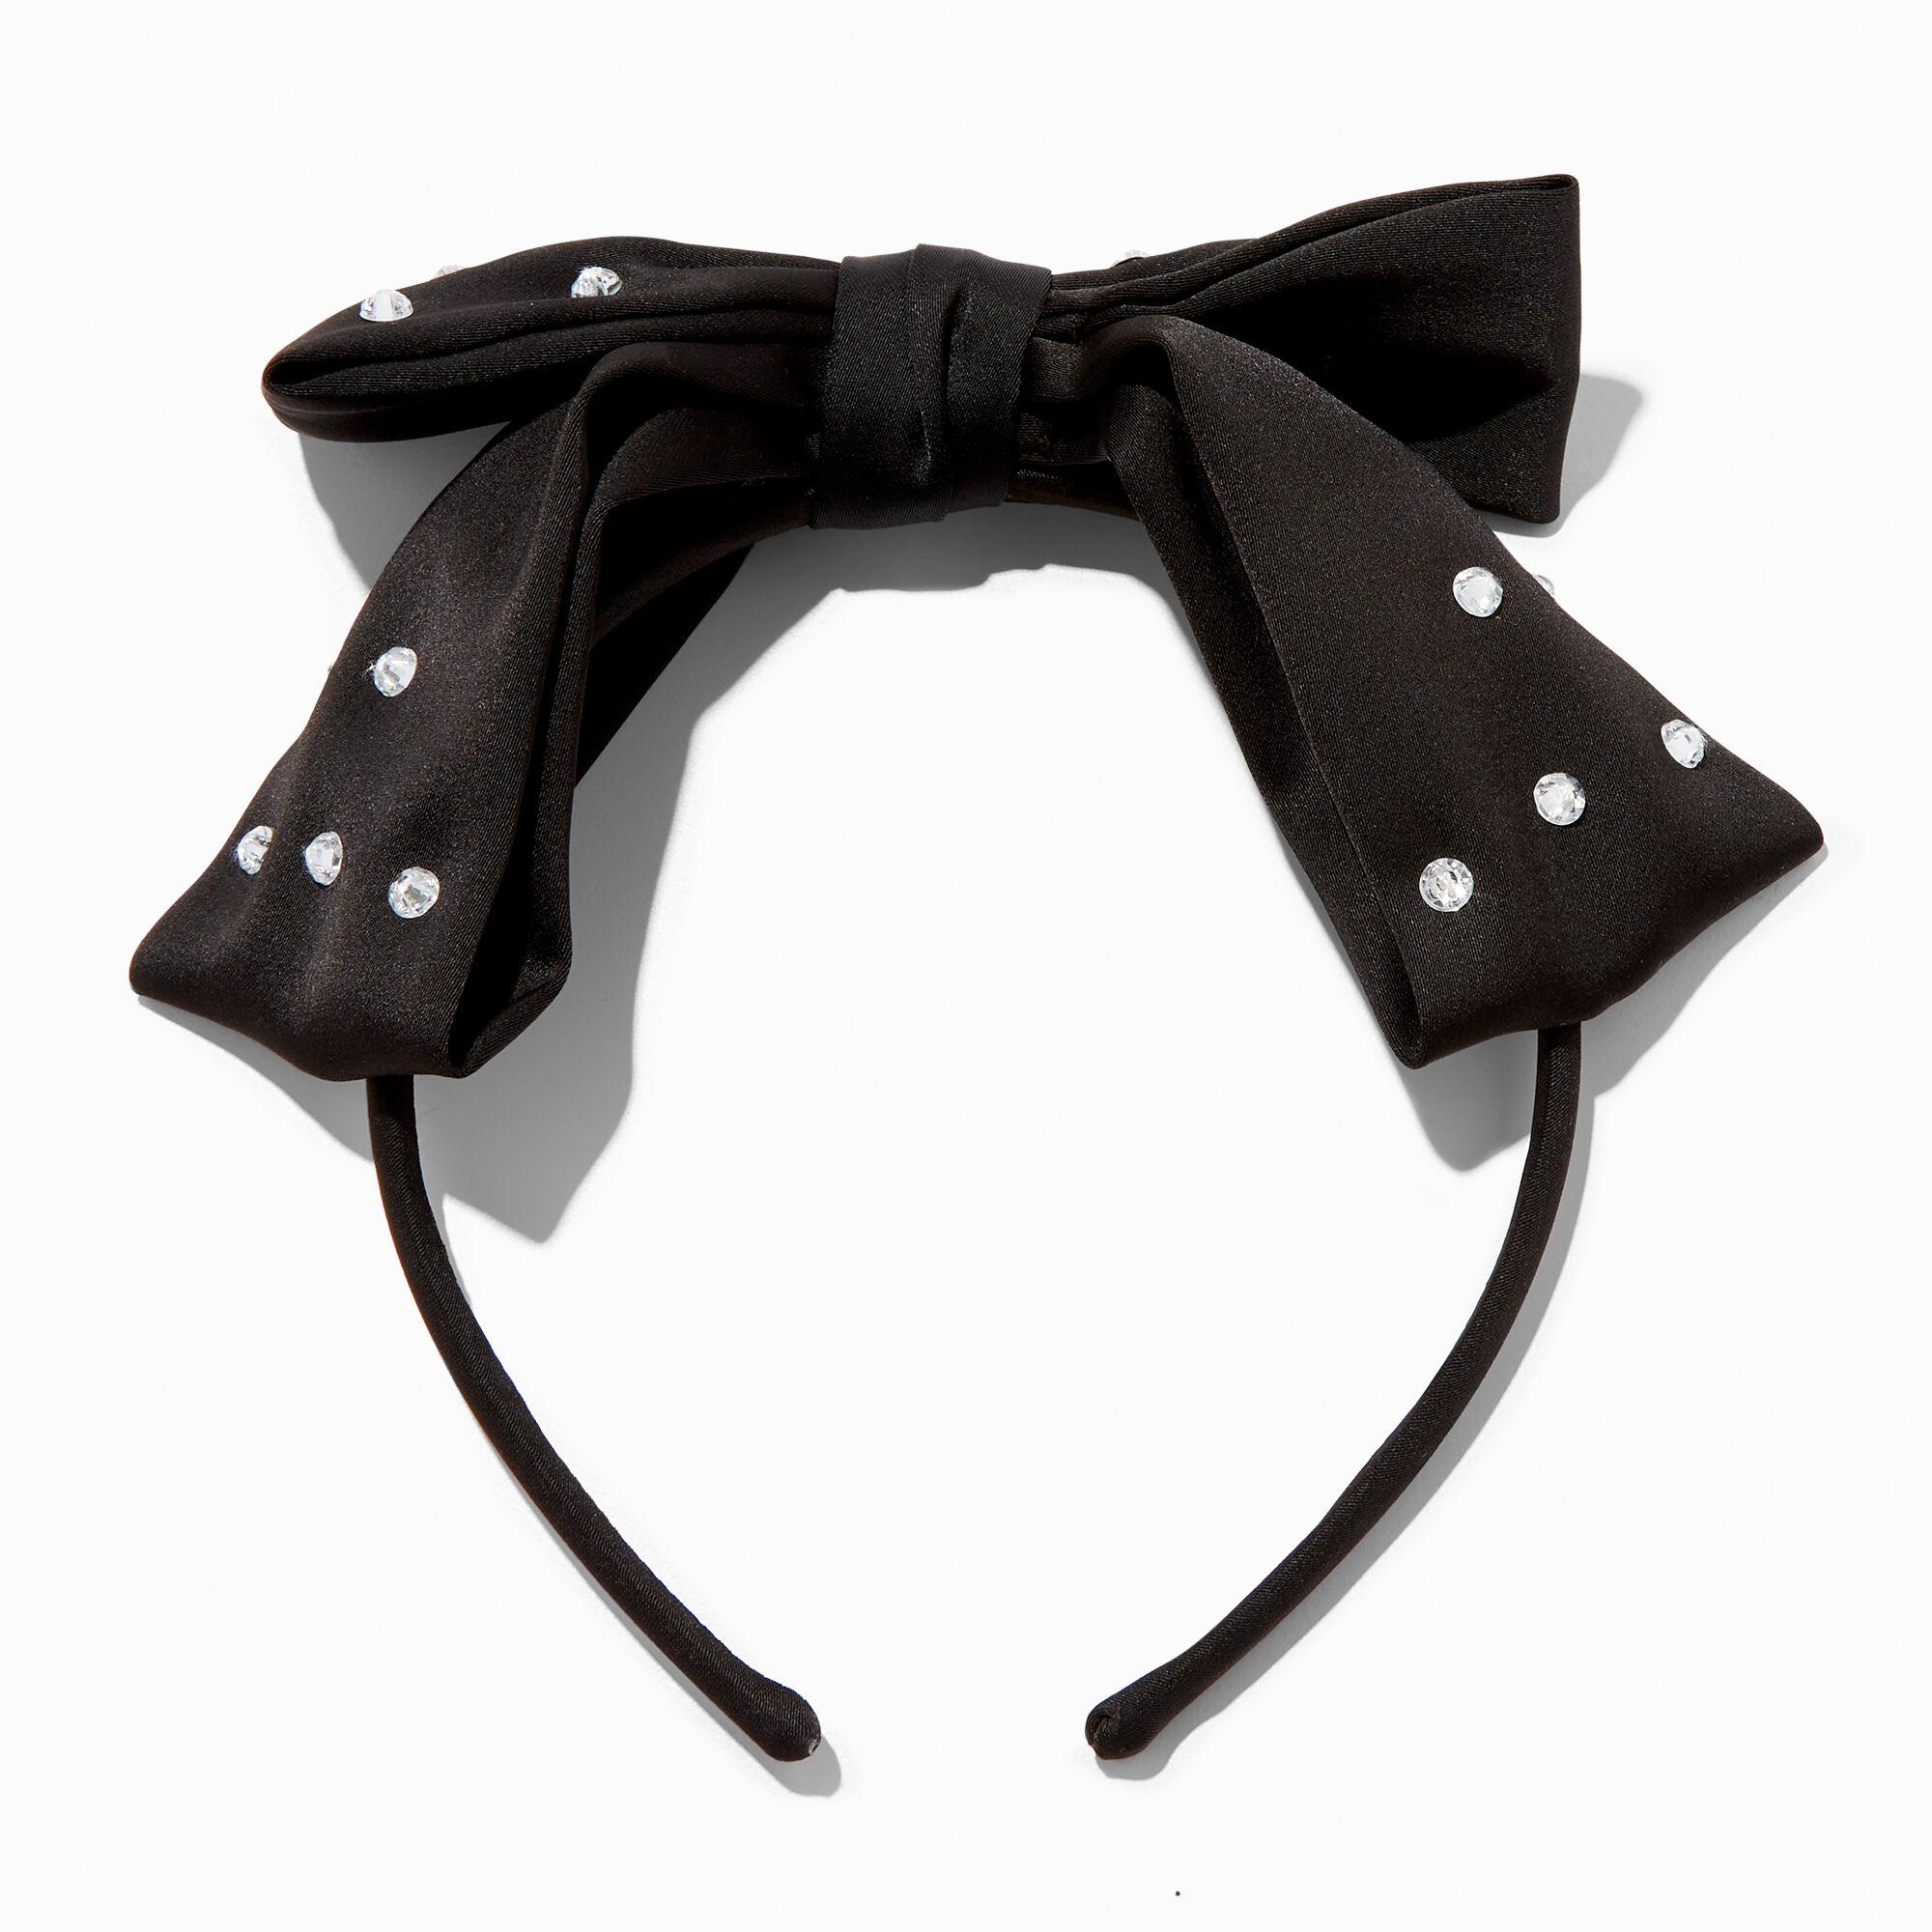 View Claires Club Bedazzled Bow Headband Black information